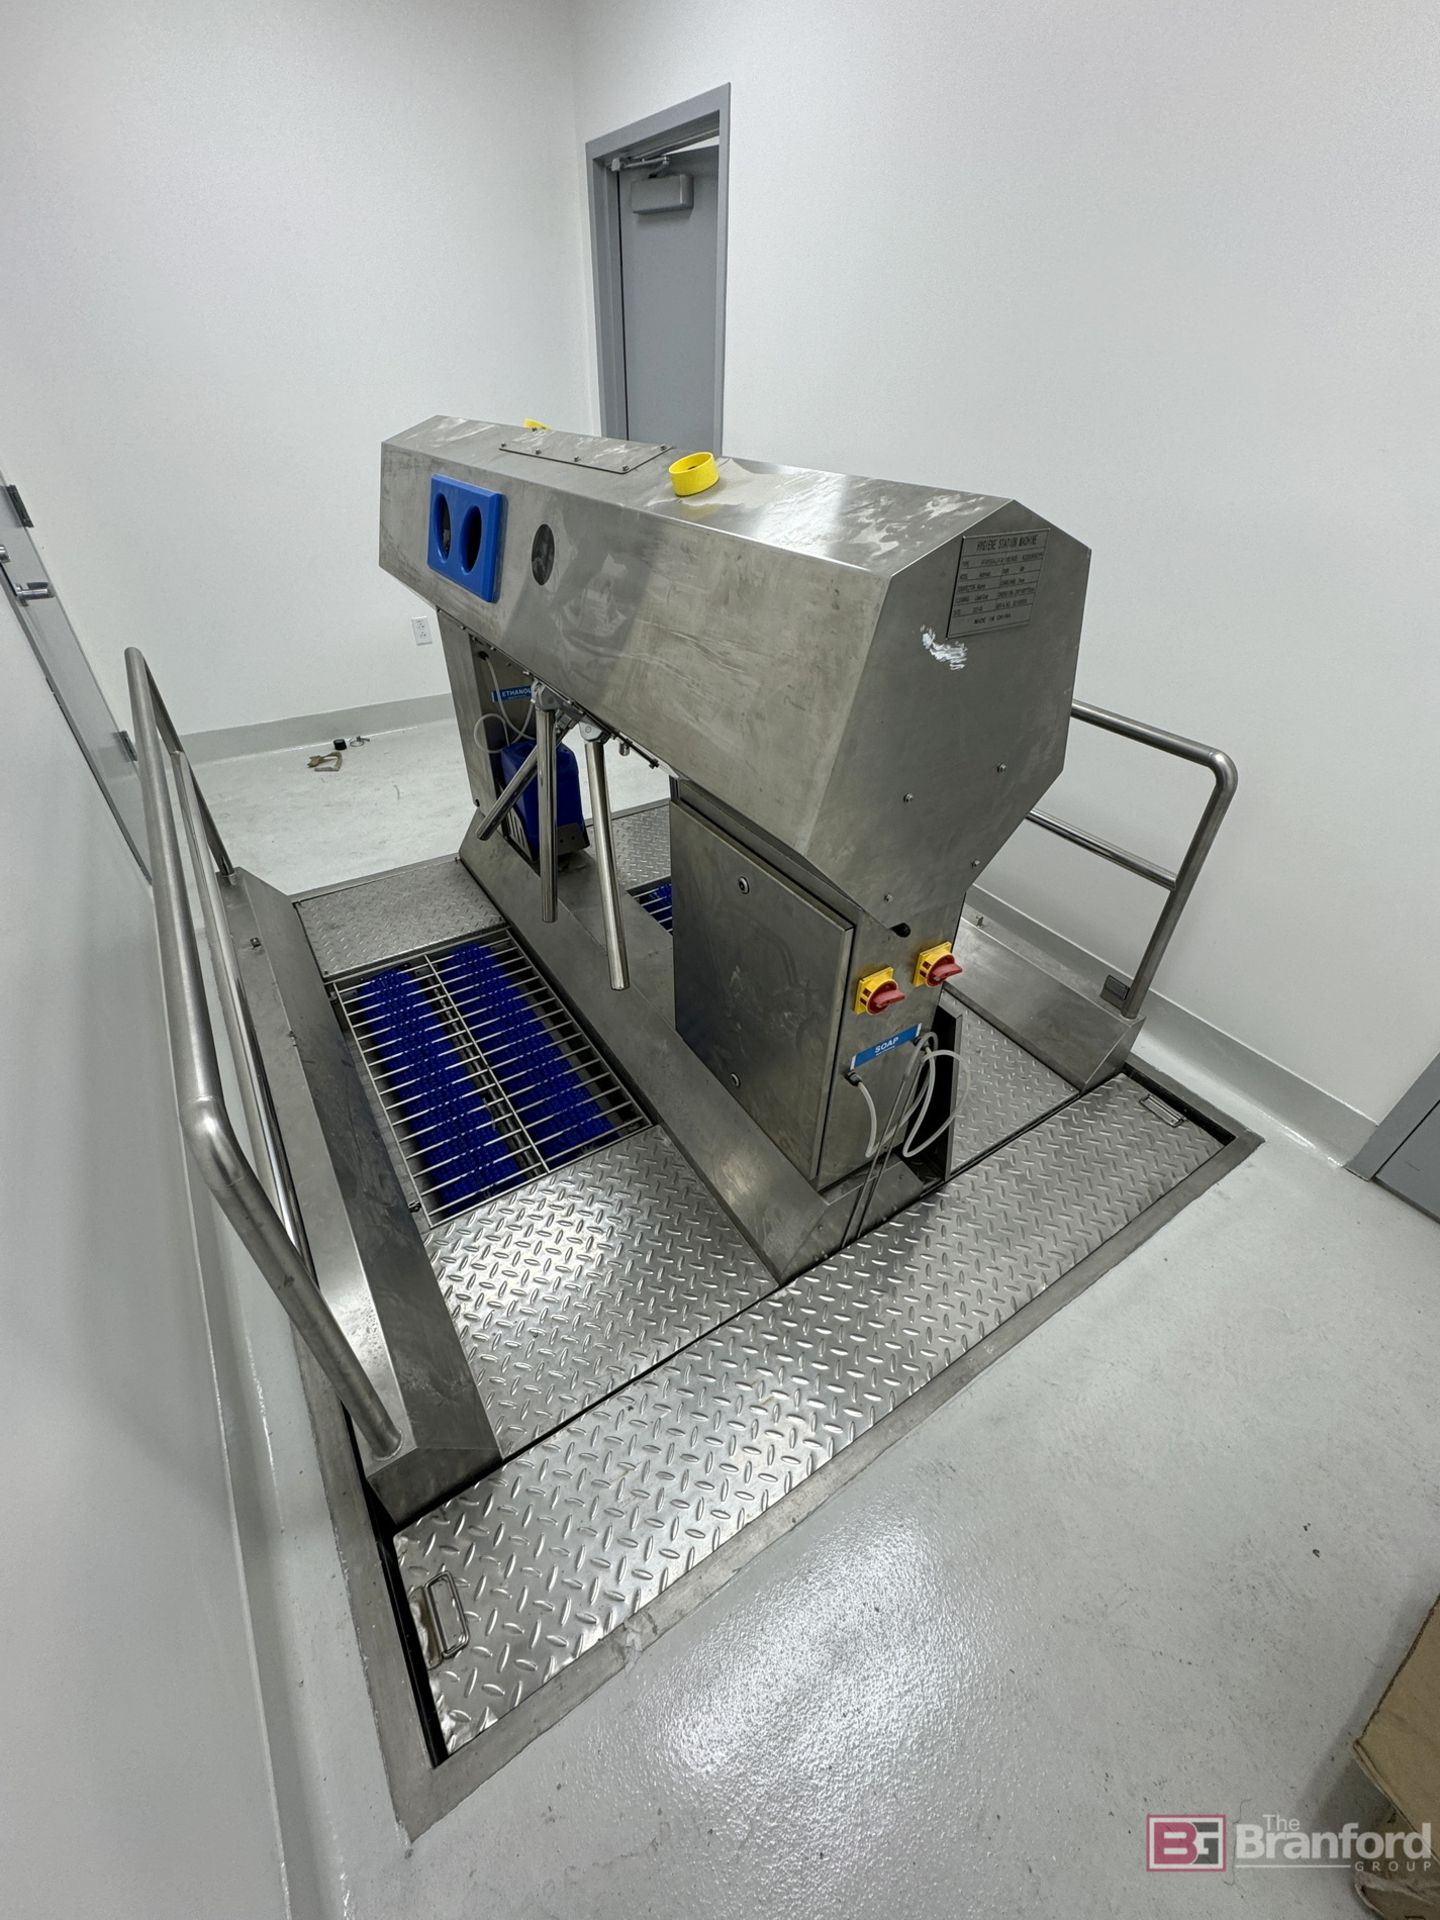 2021 ITEC Frontmatec Hygiene Systems Automatic Walk-Through Sole and Boot Cleaning Machine - Image 2 of 4